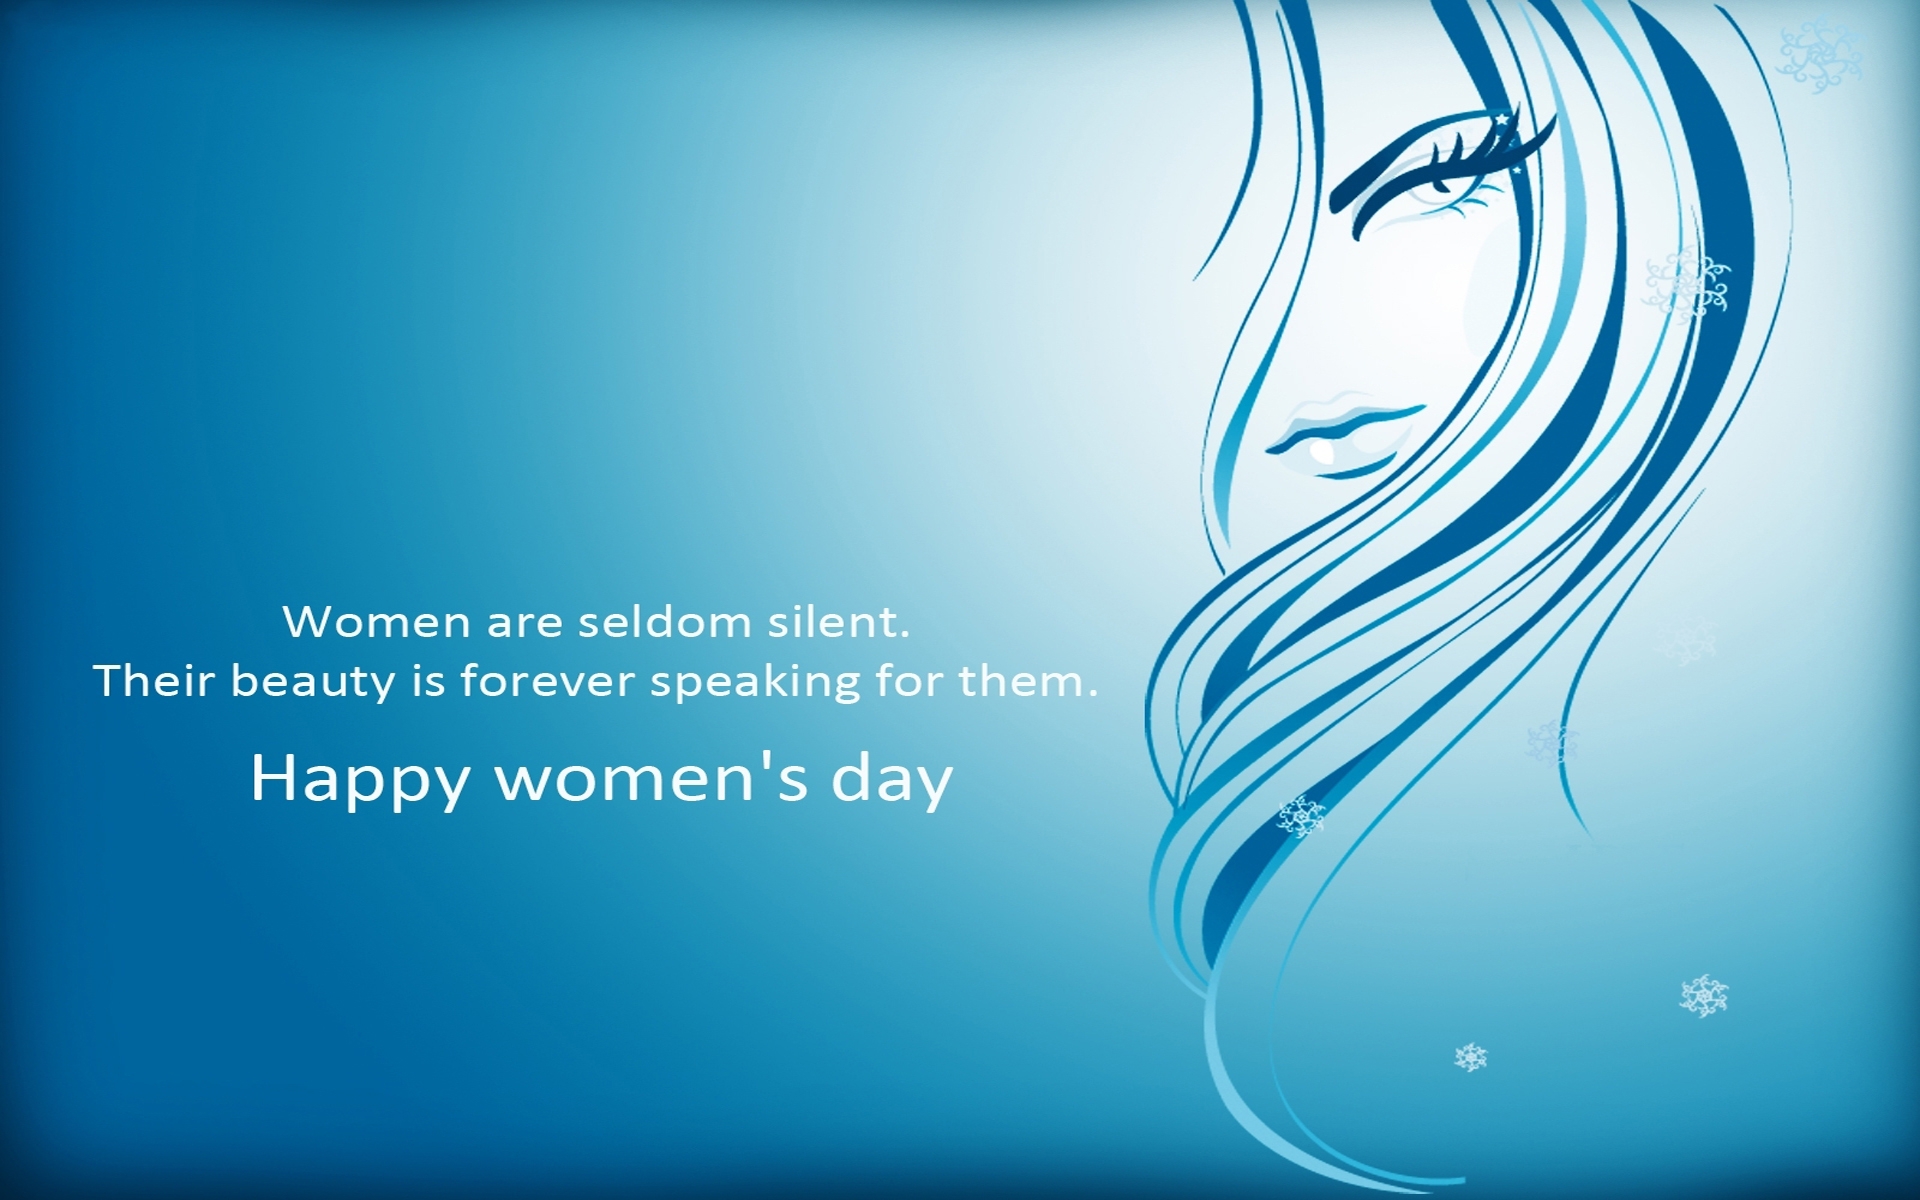 Womens day wishes photo 8 March International Women day